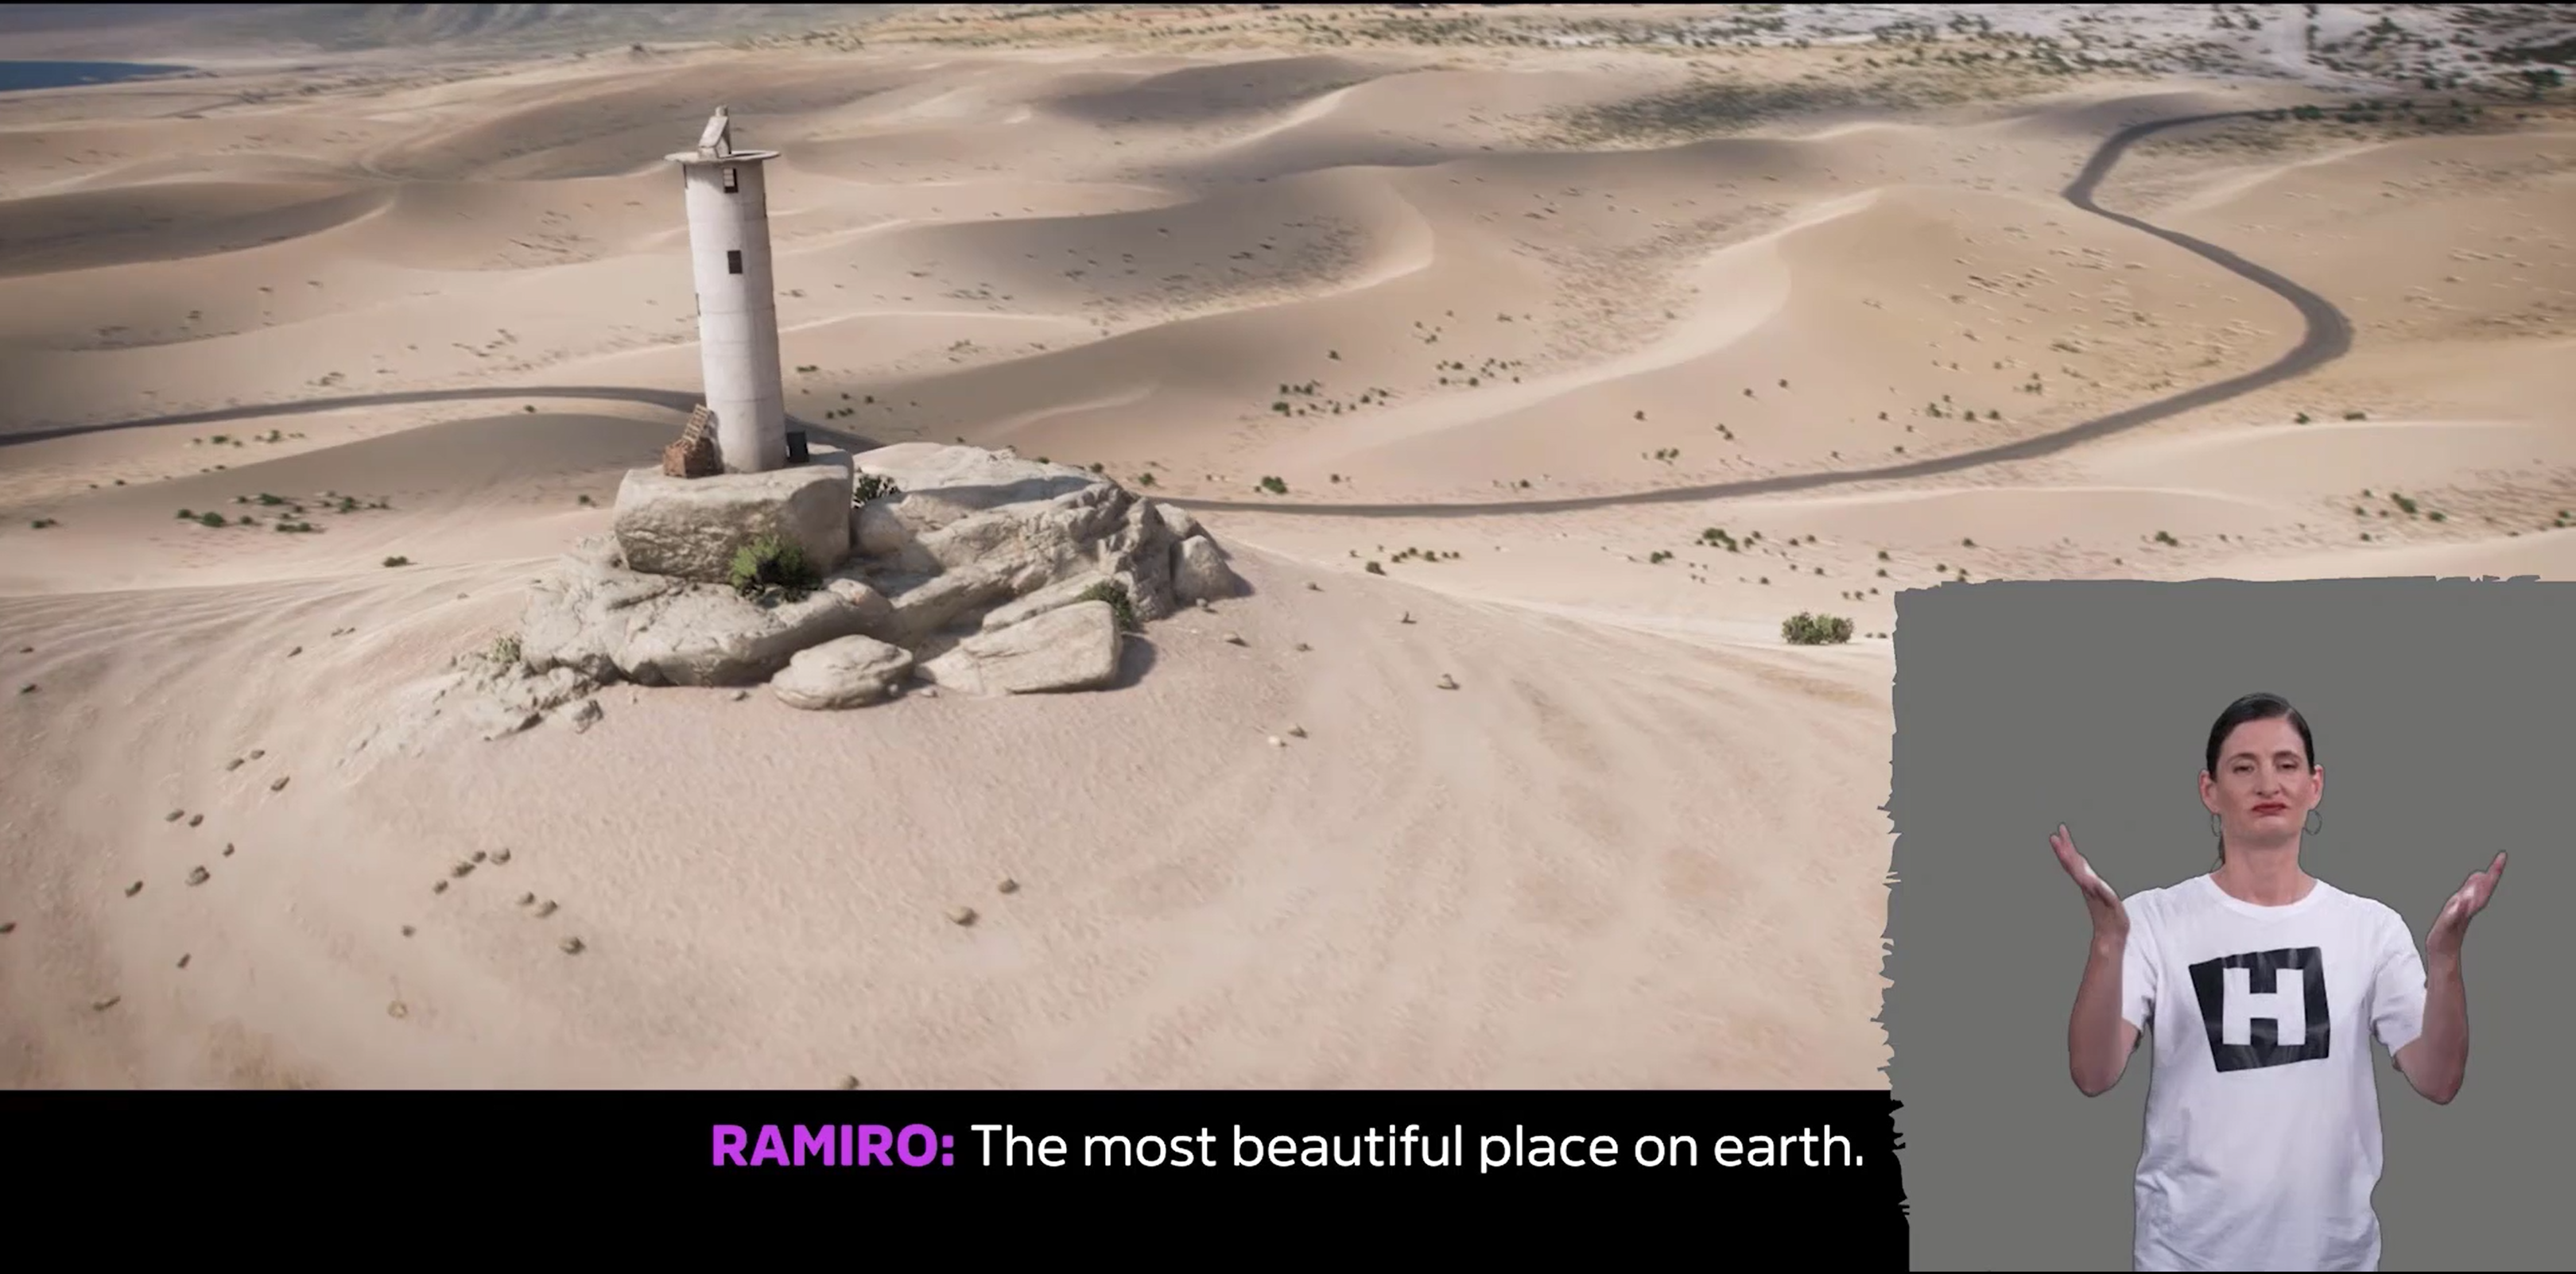 Forza Horizon 5 screenshot of a desert landscape with a single winding road cutting through. In the lower right of the screen in an overlay is an interpreter signing. Subtitles on the bottom of the screen centered reads, "Ramiro: The most beautiful place on earth."